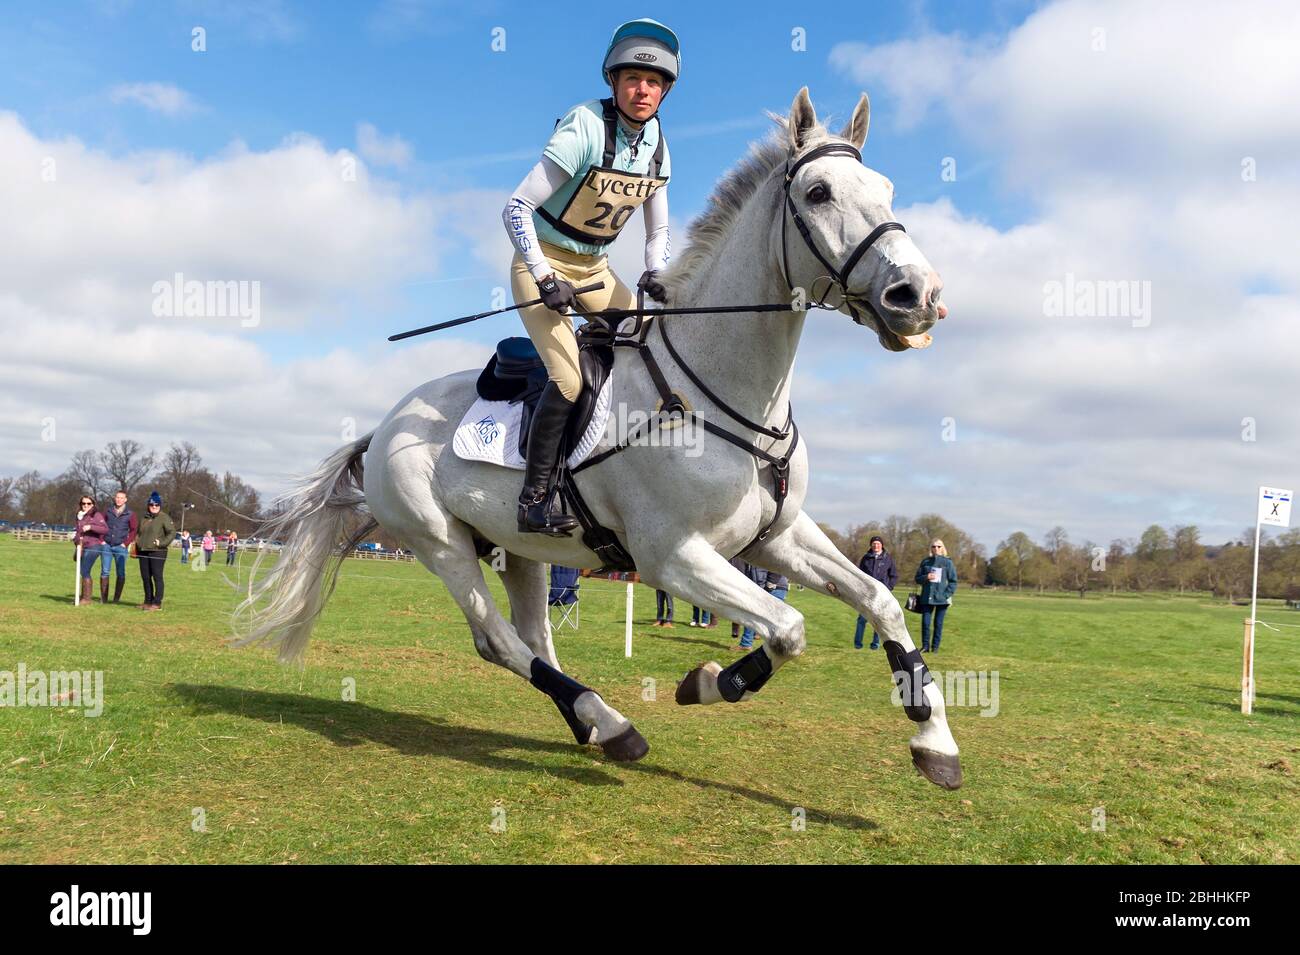 IZZY TAYLOR (GBR) RIDING  KBIS STARBURST TAKING PART IN  THE ADVANCED  CROSS COUNTRY Stock Photo